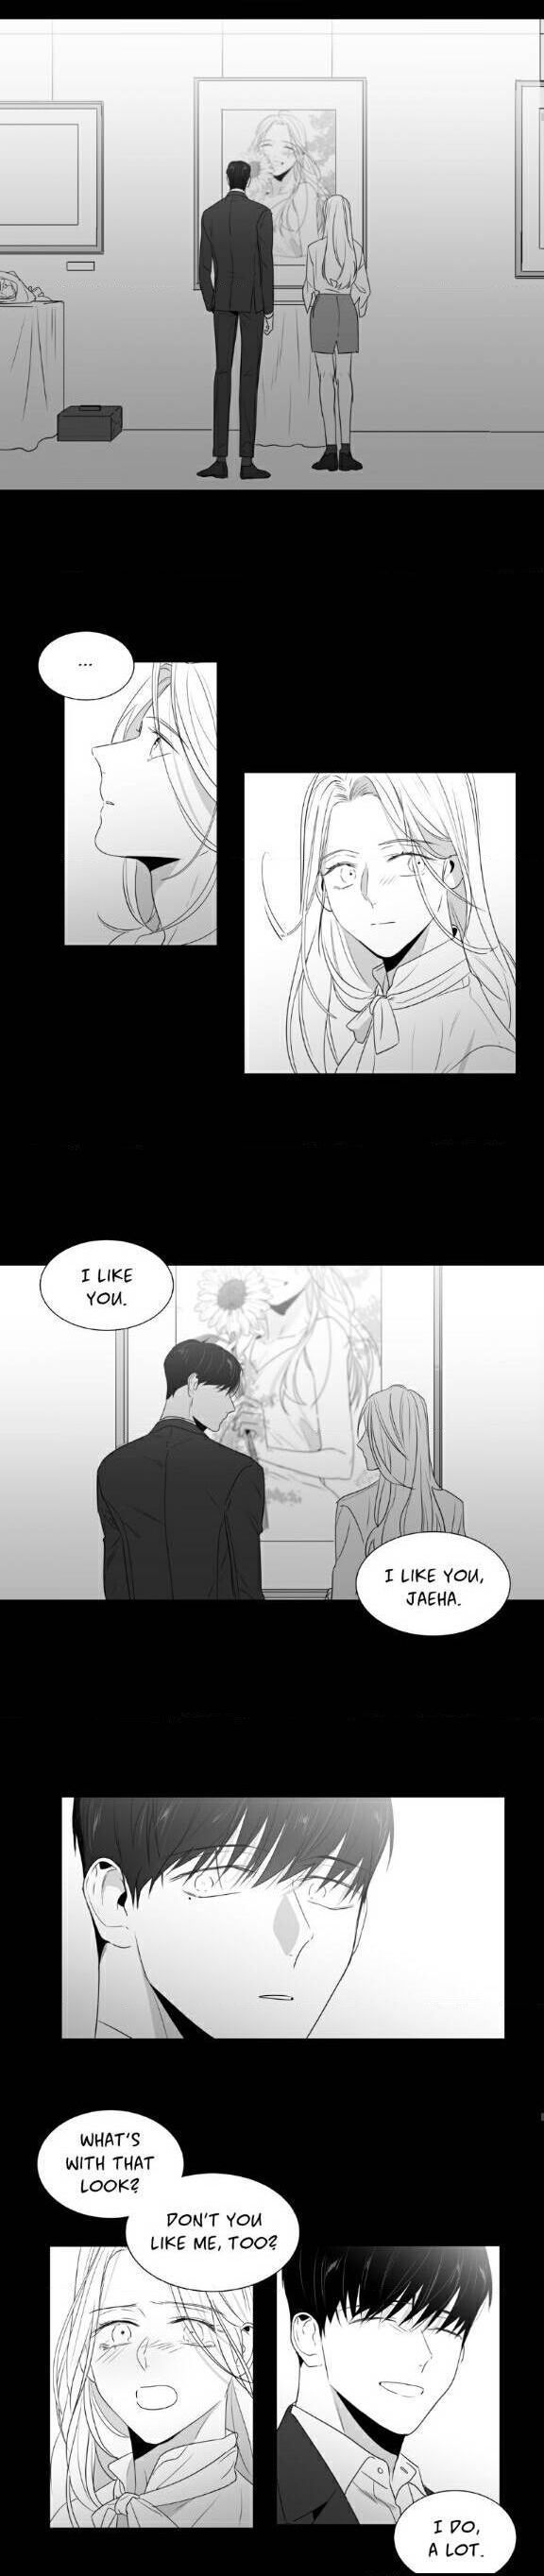 Lover Boy (Lezhin) Chapter 048.5 page 5